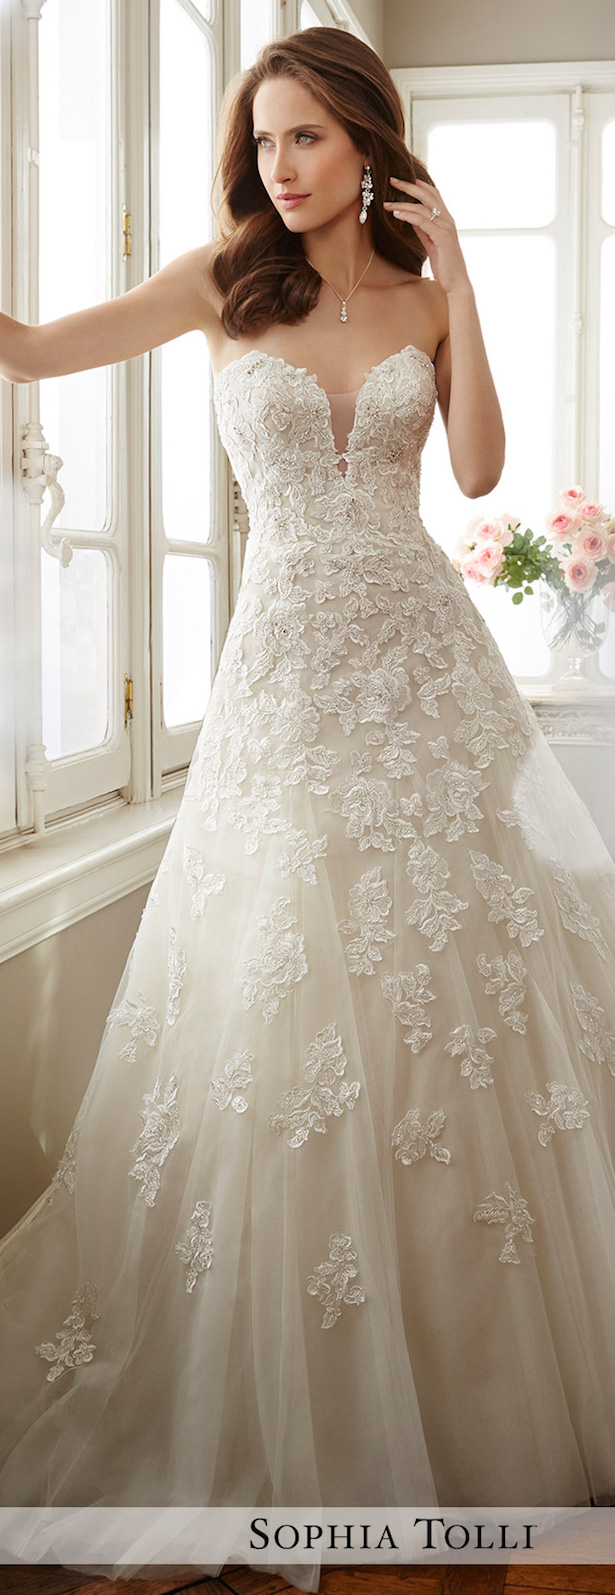 13 ivory lace and beading wedding dress will keep you covered on the neckline